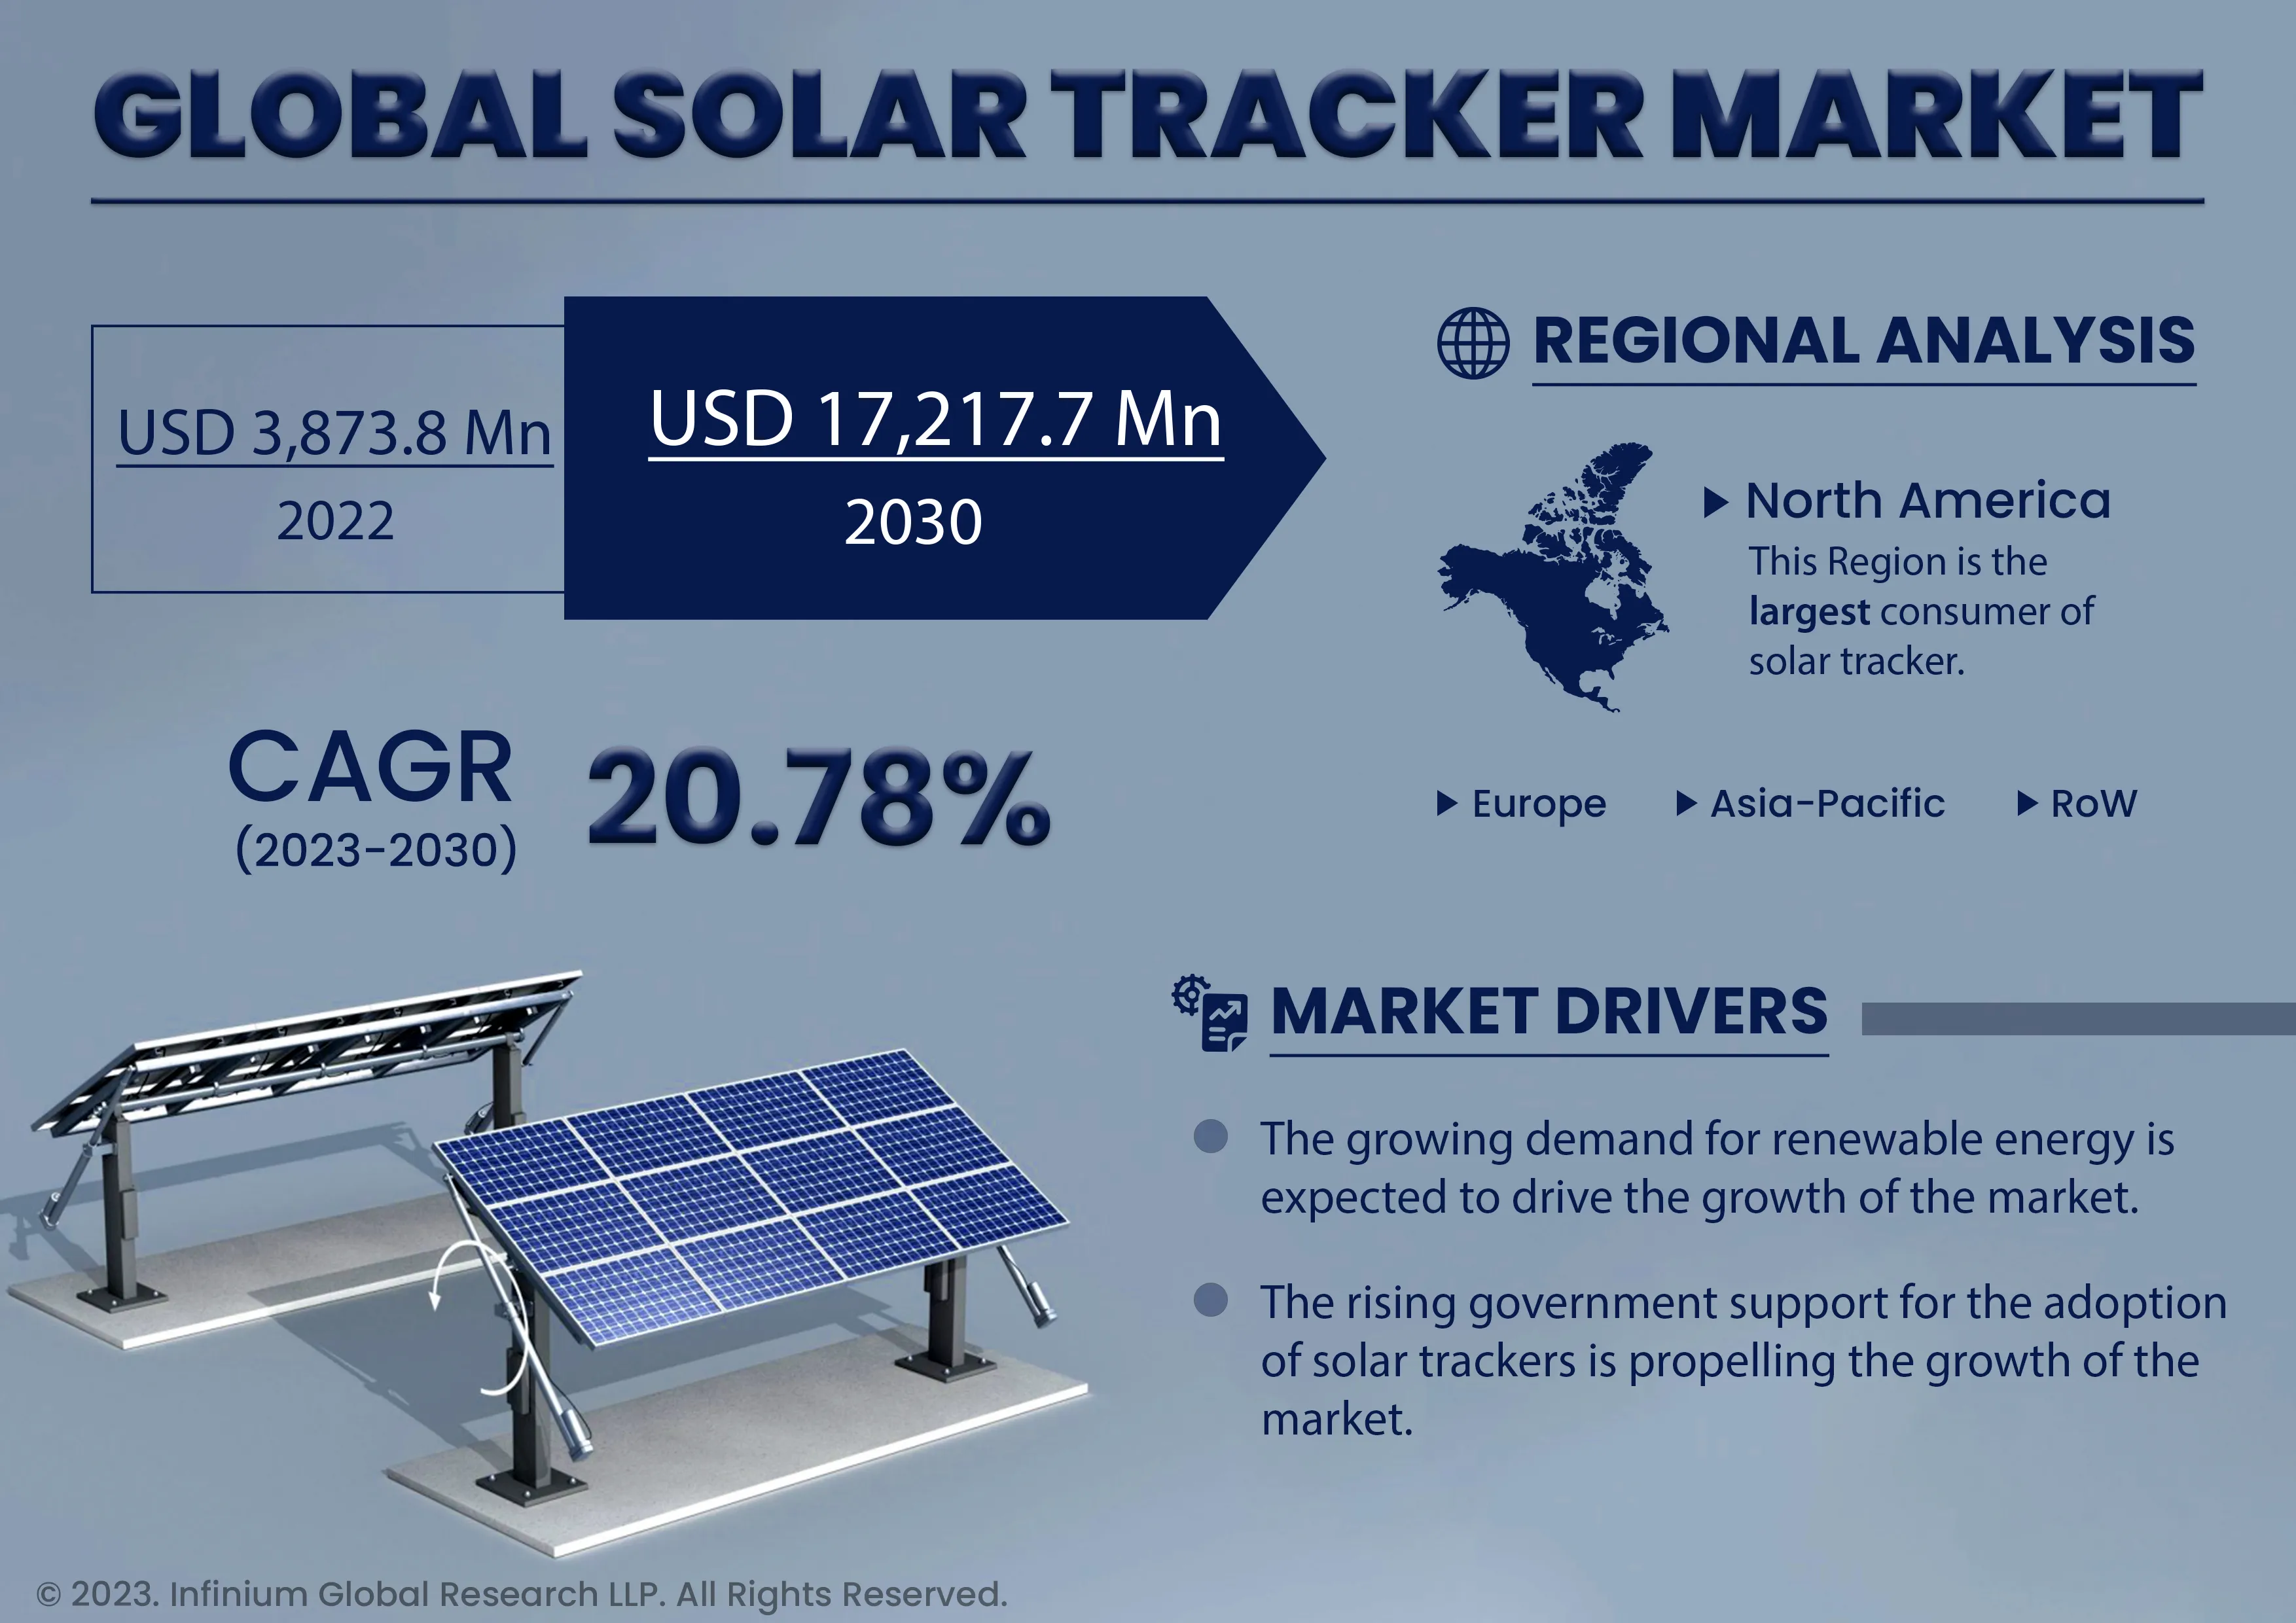 The Value of the Market in 2022 was USD 3,873.8 Million and Expected to Reach USD 17,217.7 Million in 2030 with a CAGR of 20.78% During the Forecast Period.